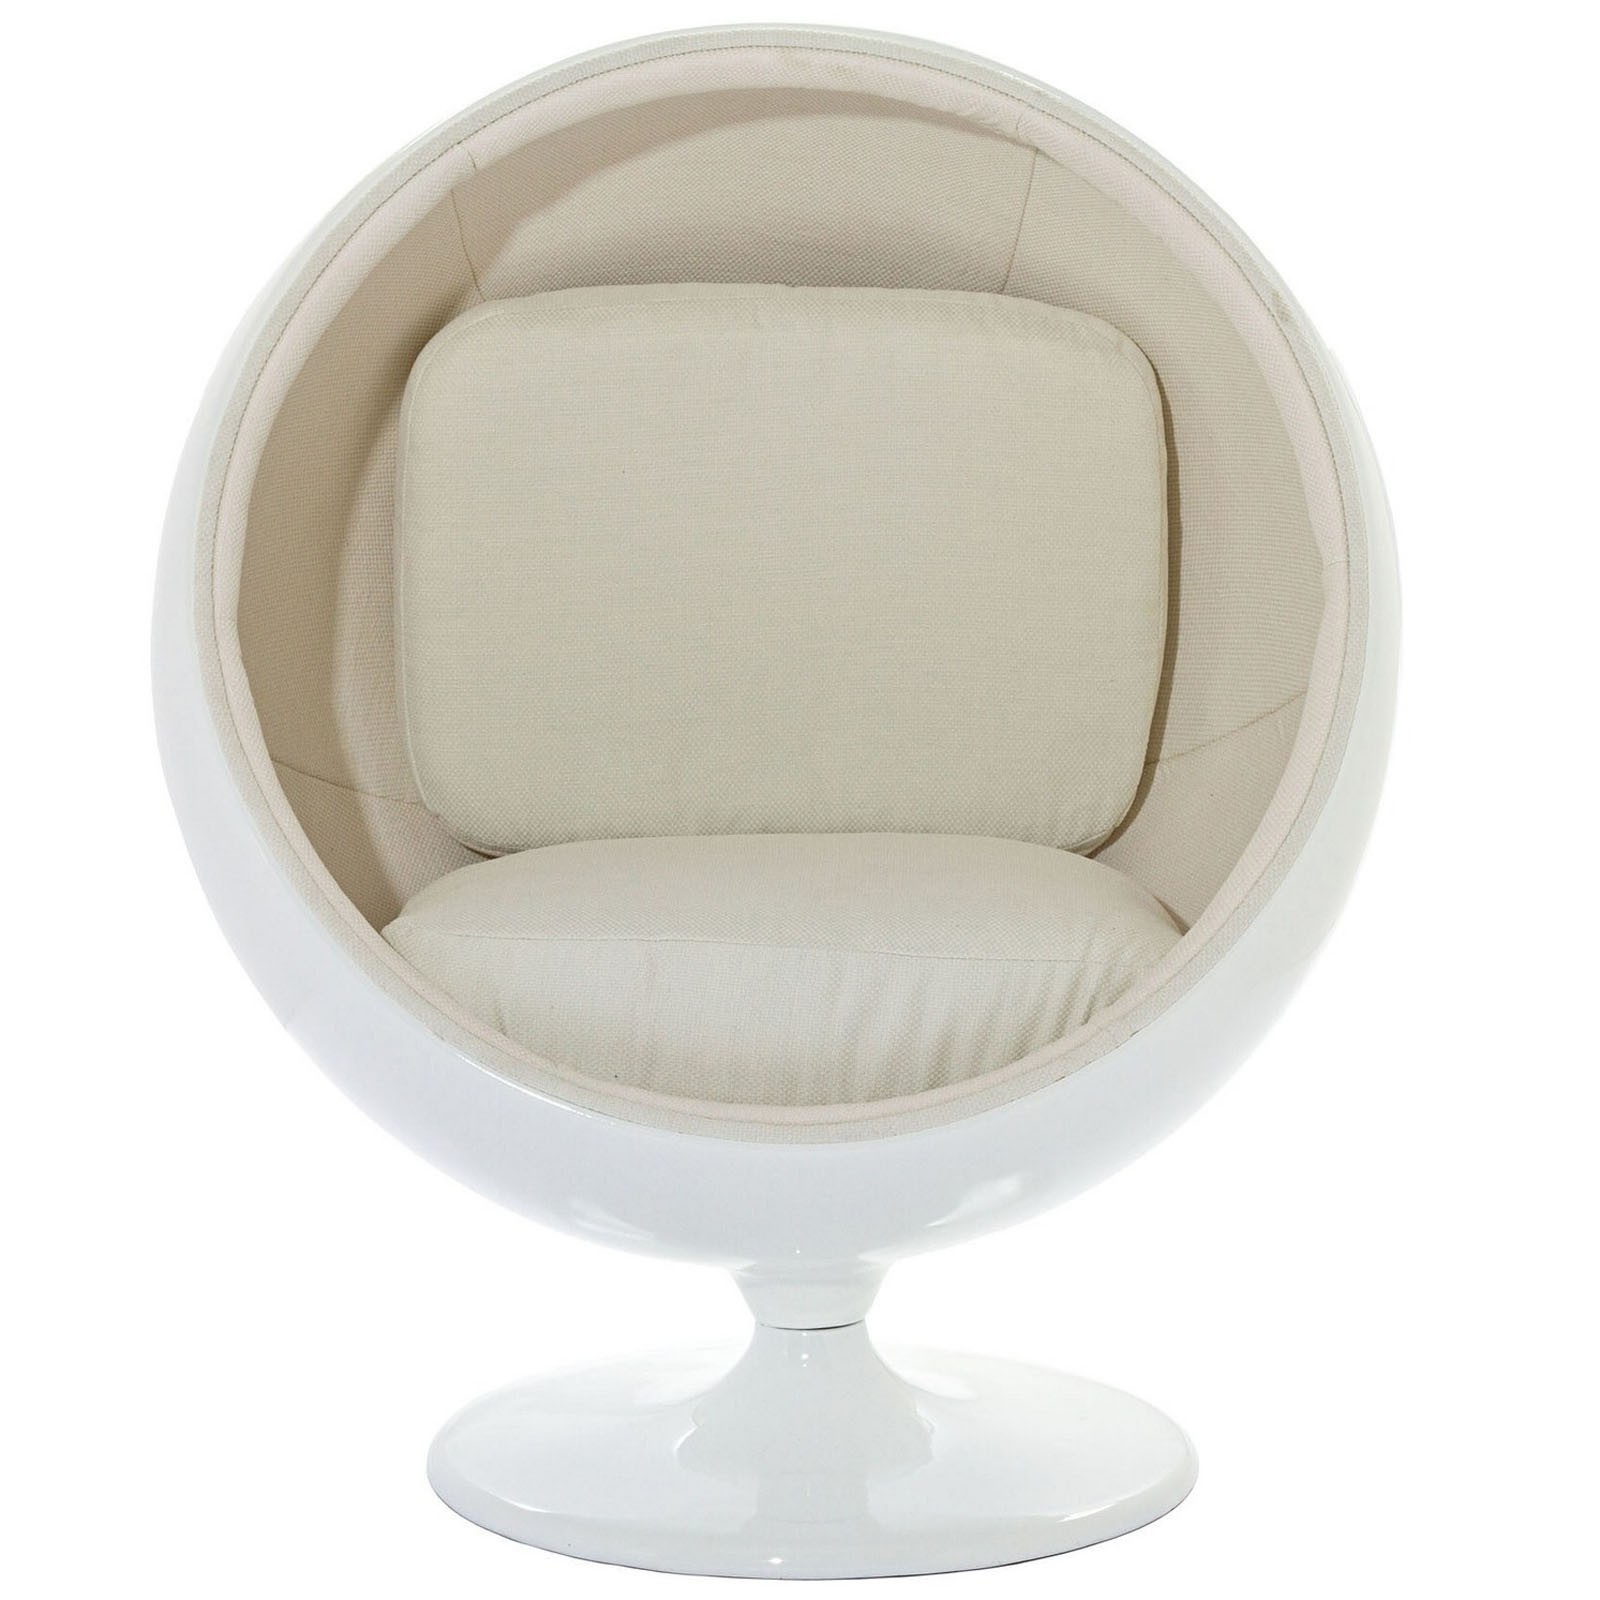 LexMod Eero Aarnio Style Ball Chair in White